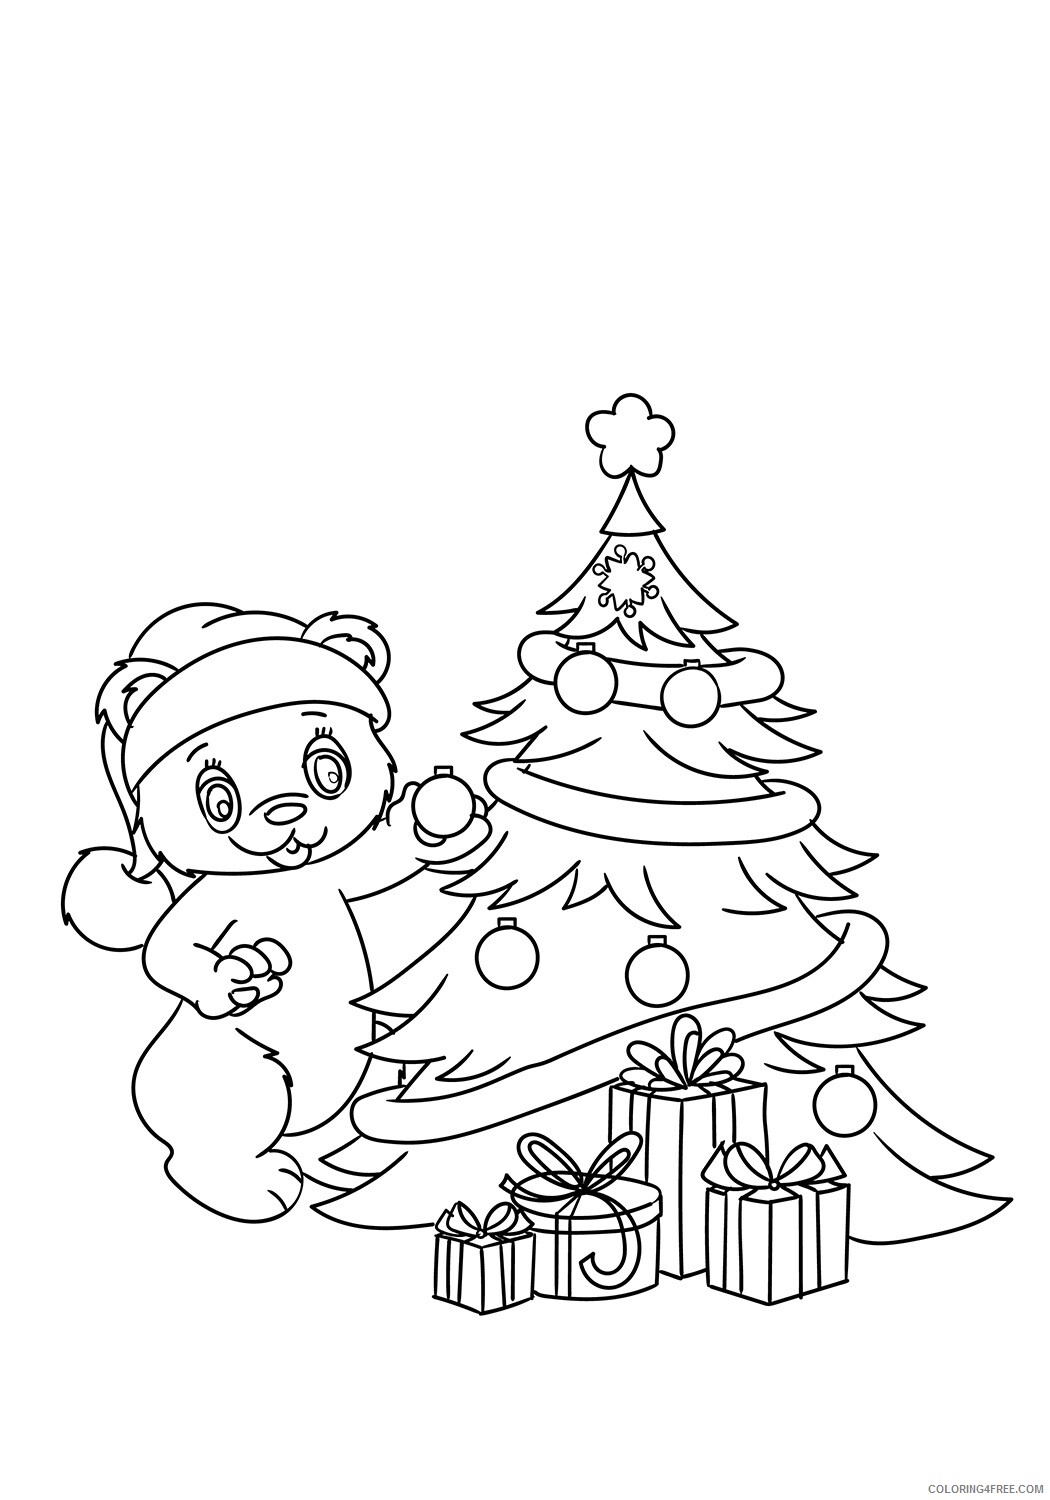 Teddy Bears Coloring Pages for Girls teddy decorating the tree Printable 2021 Coloring4free